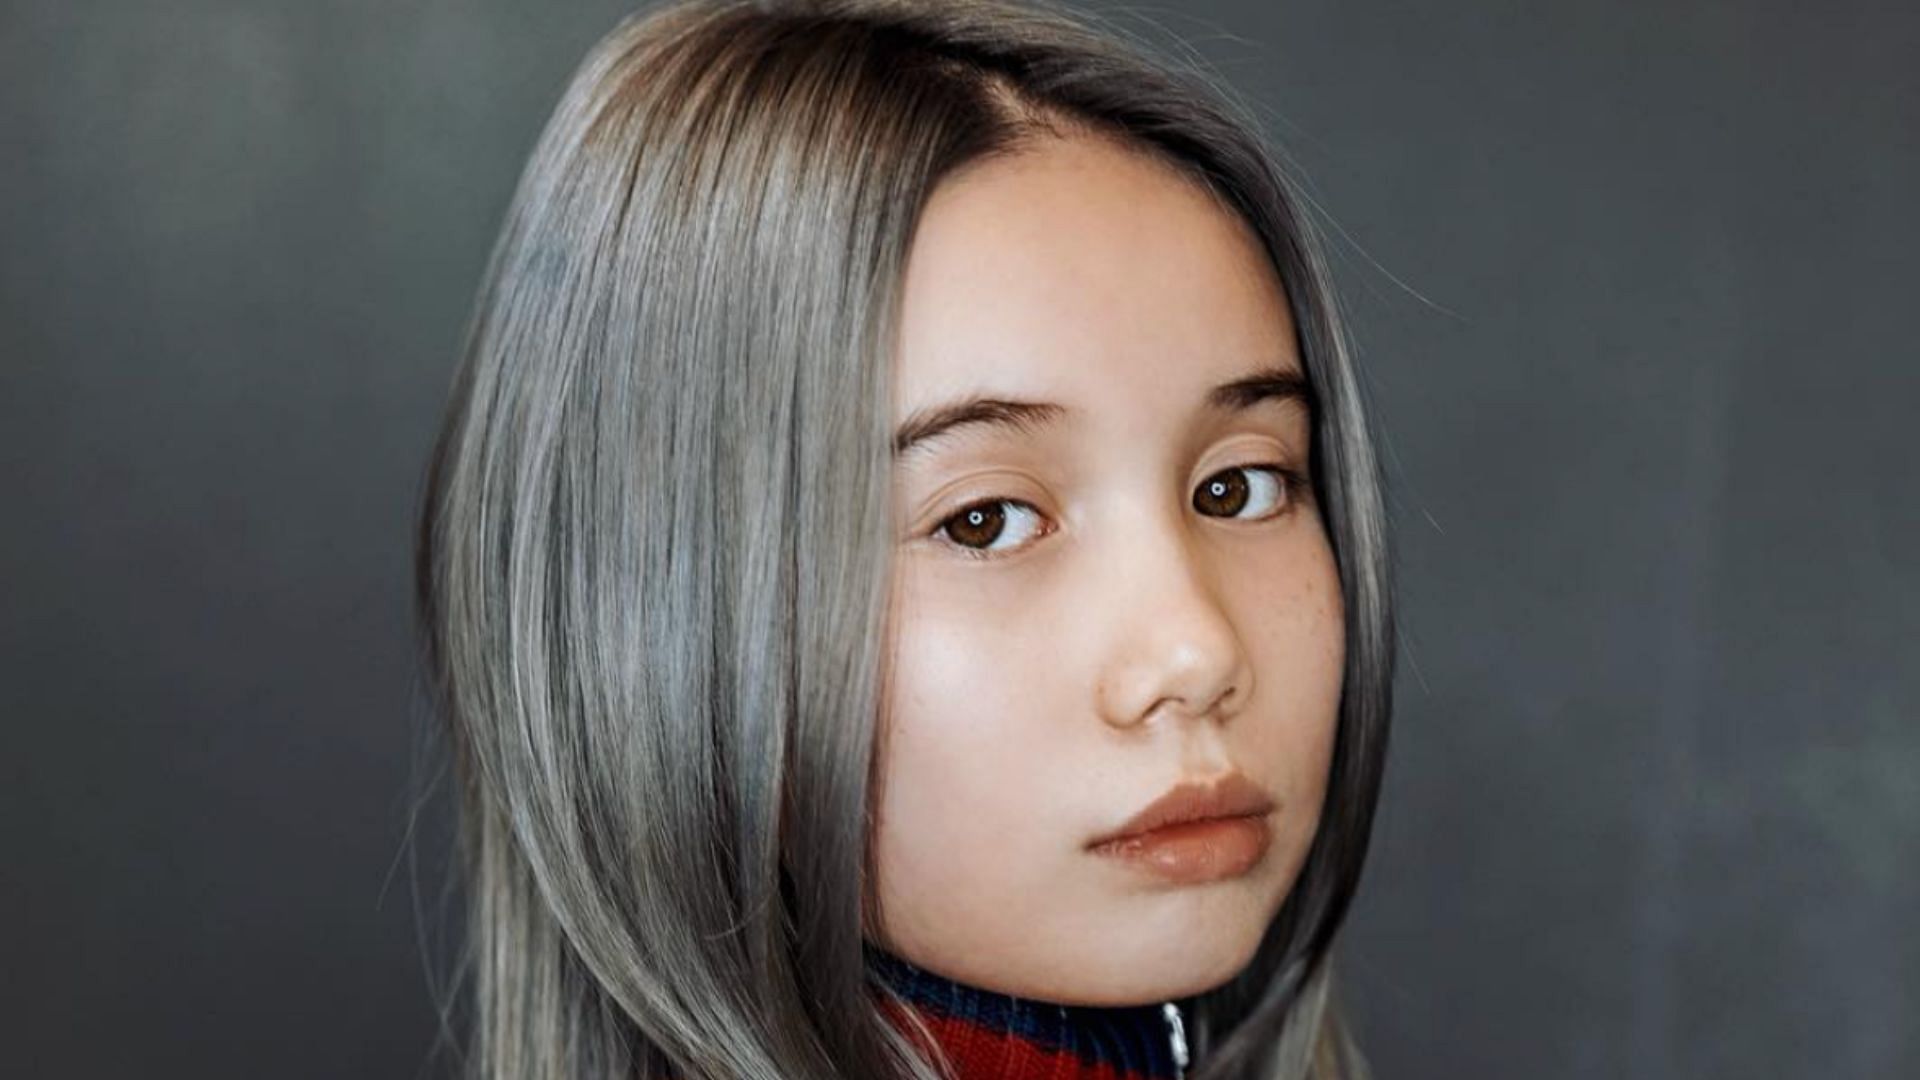 Who are Lil Tay